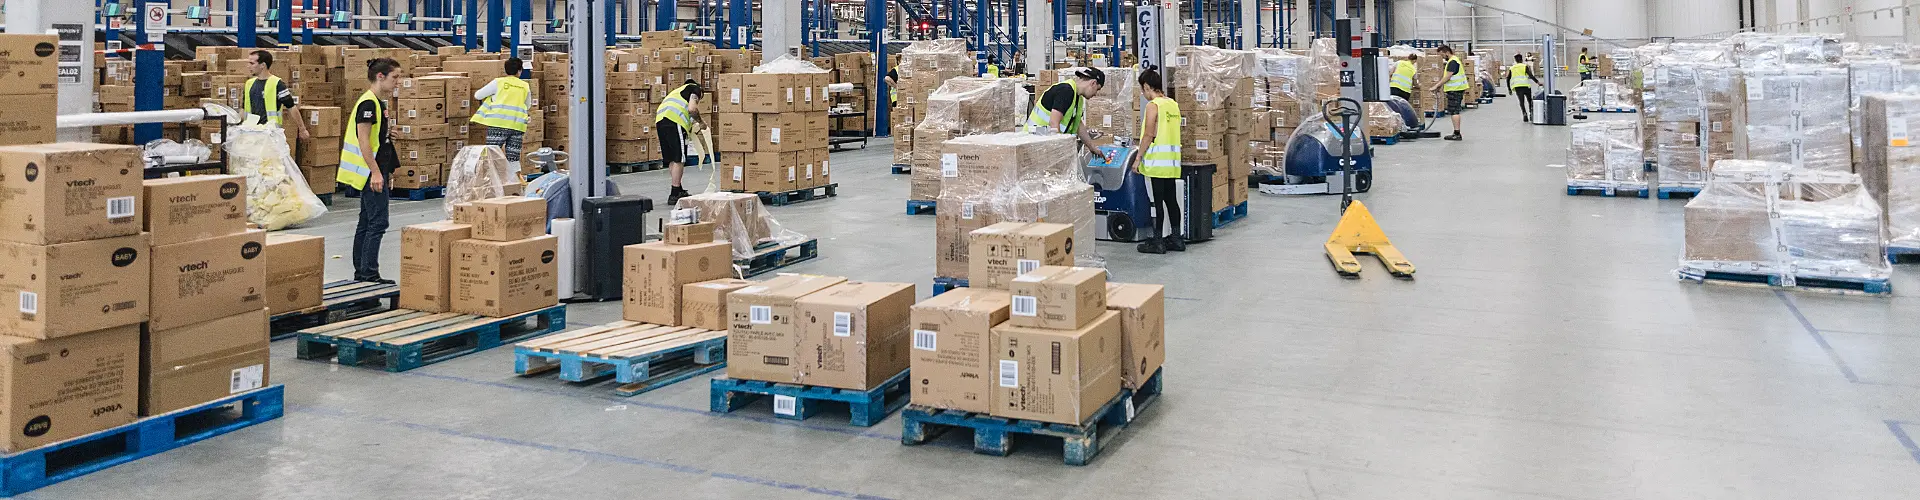 Warehouse with people moving packages